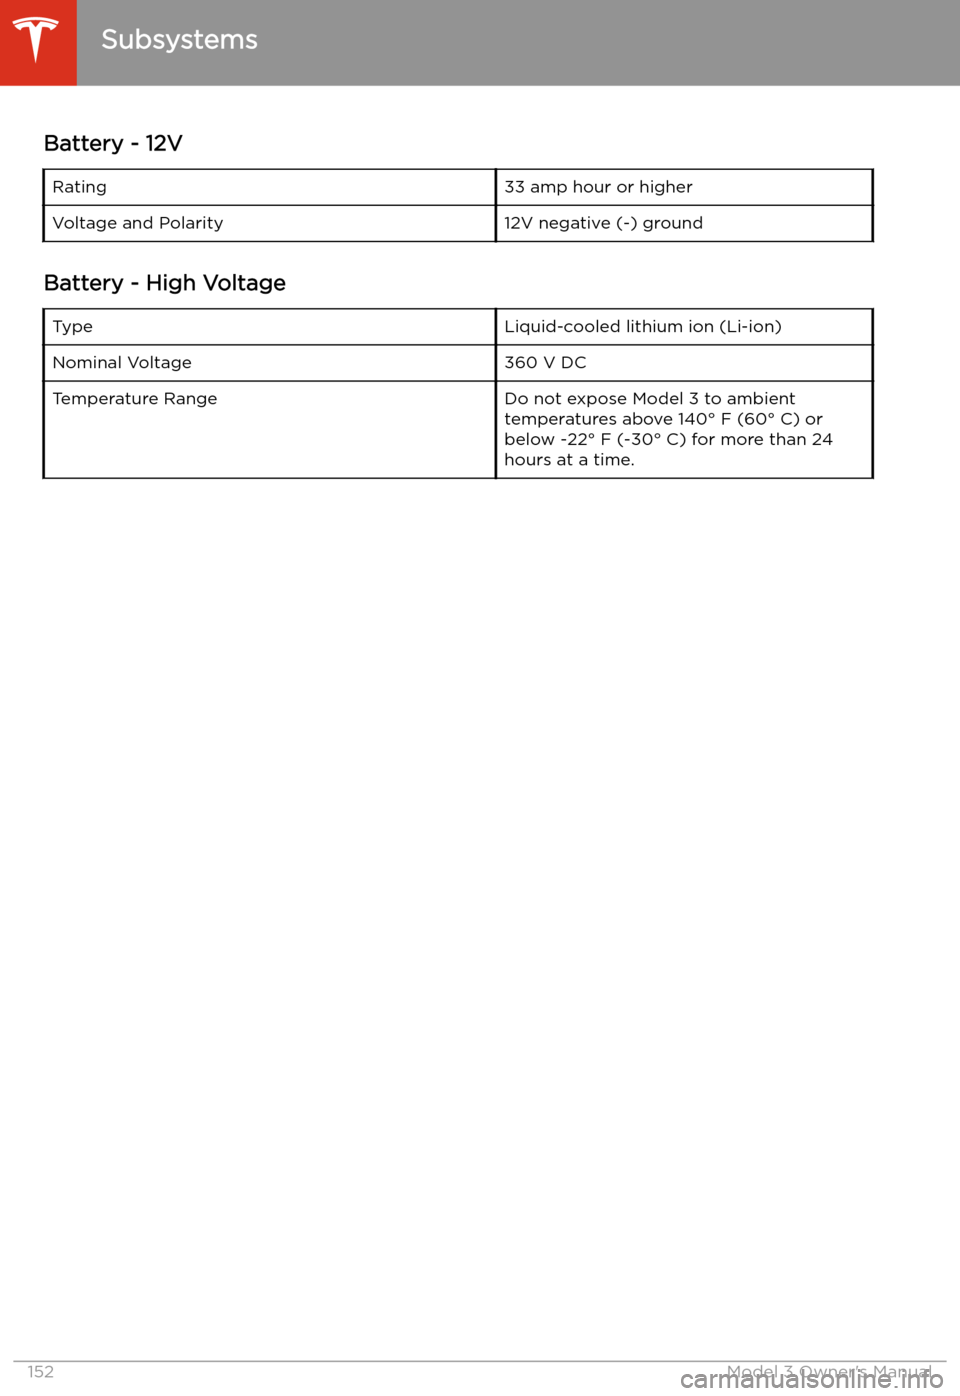 TESLA MODEL 3 2019  Owners Manual (Europe) Battery - 12VRating33 amp hour or higherVoltage and Polarity12V negative (-) ground
Battery - High Voltage
TypeLiquid-cooled lithium ion (Li-ion)Nominal Voltage360 V DCTemperature RangeDo not expose M